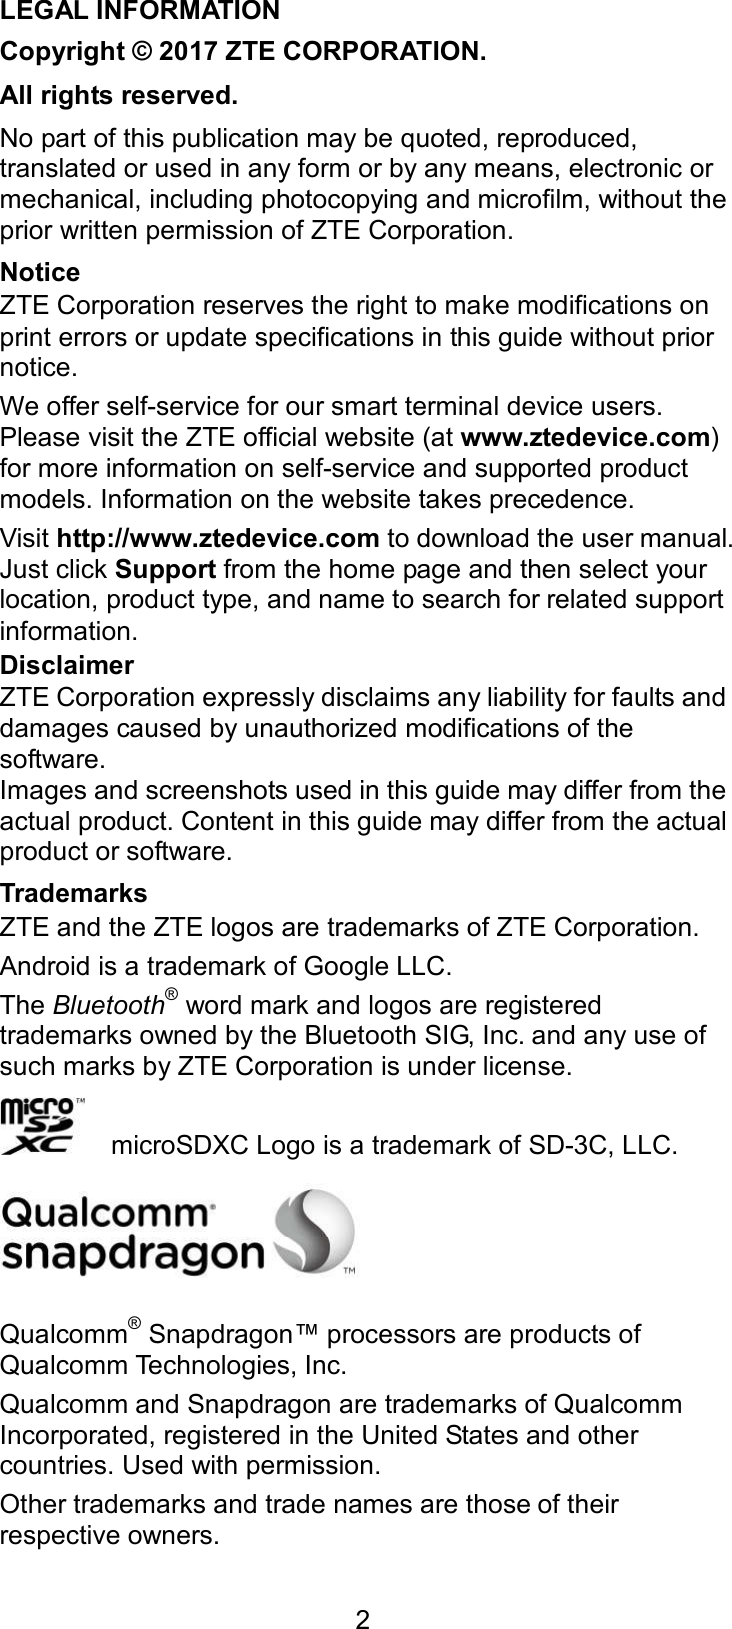  2 LEGAL INFORMATION Copyright © 2017 ZTE CORPORATION. All rights reserved. No part of this publication may be quoted, reproduced, translated or used in any form or by any means, electronic or mechanical, including photocopying and microfilm, without the prior written permission of ZTE Corporation. Notice ZTE Corporation reserves the right to make modifications on print errors or update specifications in this guide without prior notice. We offer self-service for our smart terminal device users. Please visit the ZTE official website (at www.ztedevice.com) for more information on self-service and supported product models. Information on the website takes precedence. Visit http://www.ztedevice.com to download the user manual. Just click Support from the home page and then select your location, product type, and name to search for related support information. Disclaimer ZTE Corporation expressly disclaims any liability for faults and damages caused by unauthorized modifications of the software. Images and screenshots used in this guide may differ from the actual product. Content in this guide may differ from the actual product or software. Trademarks ZTE and the ZTE logos are trademarks of ZTE Corporation. Android is a trademark of Google LLC. The Bluetooth® word mark and logos are registered trademarks owned by the Bluetooth SIG, Inc. and any use of such marks by ZTE Corporation is under license.       microSDXC Logo is a trademark of SD-3C, LLC.  Qualcomm® Snapdragon™ processors are products of Qualcomm Technologies, Inc.   Qualcomm and Snapdragon are trademarks of Qualcomm Incorporated, registered in the United States and other countries. Used with permission. Other trademarks and trade names are those of their respective owners. 